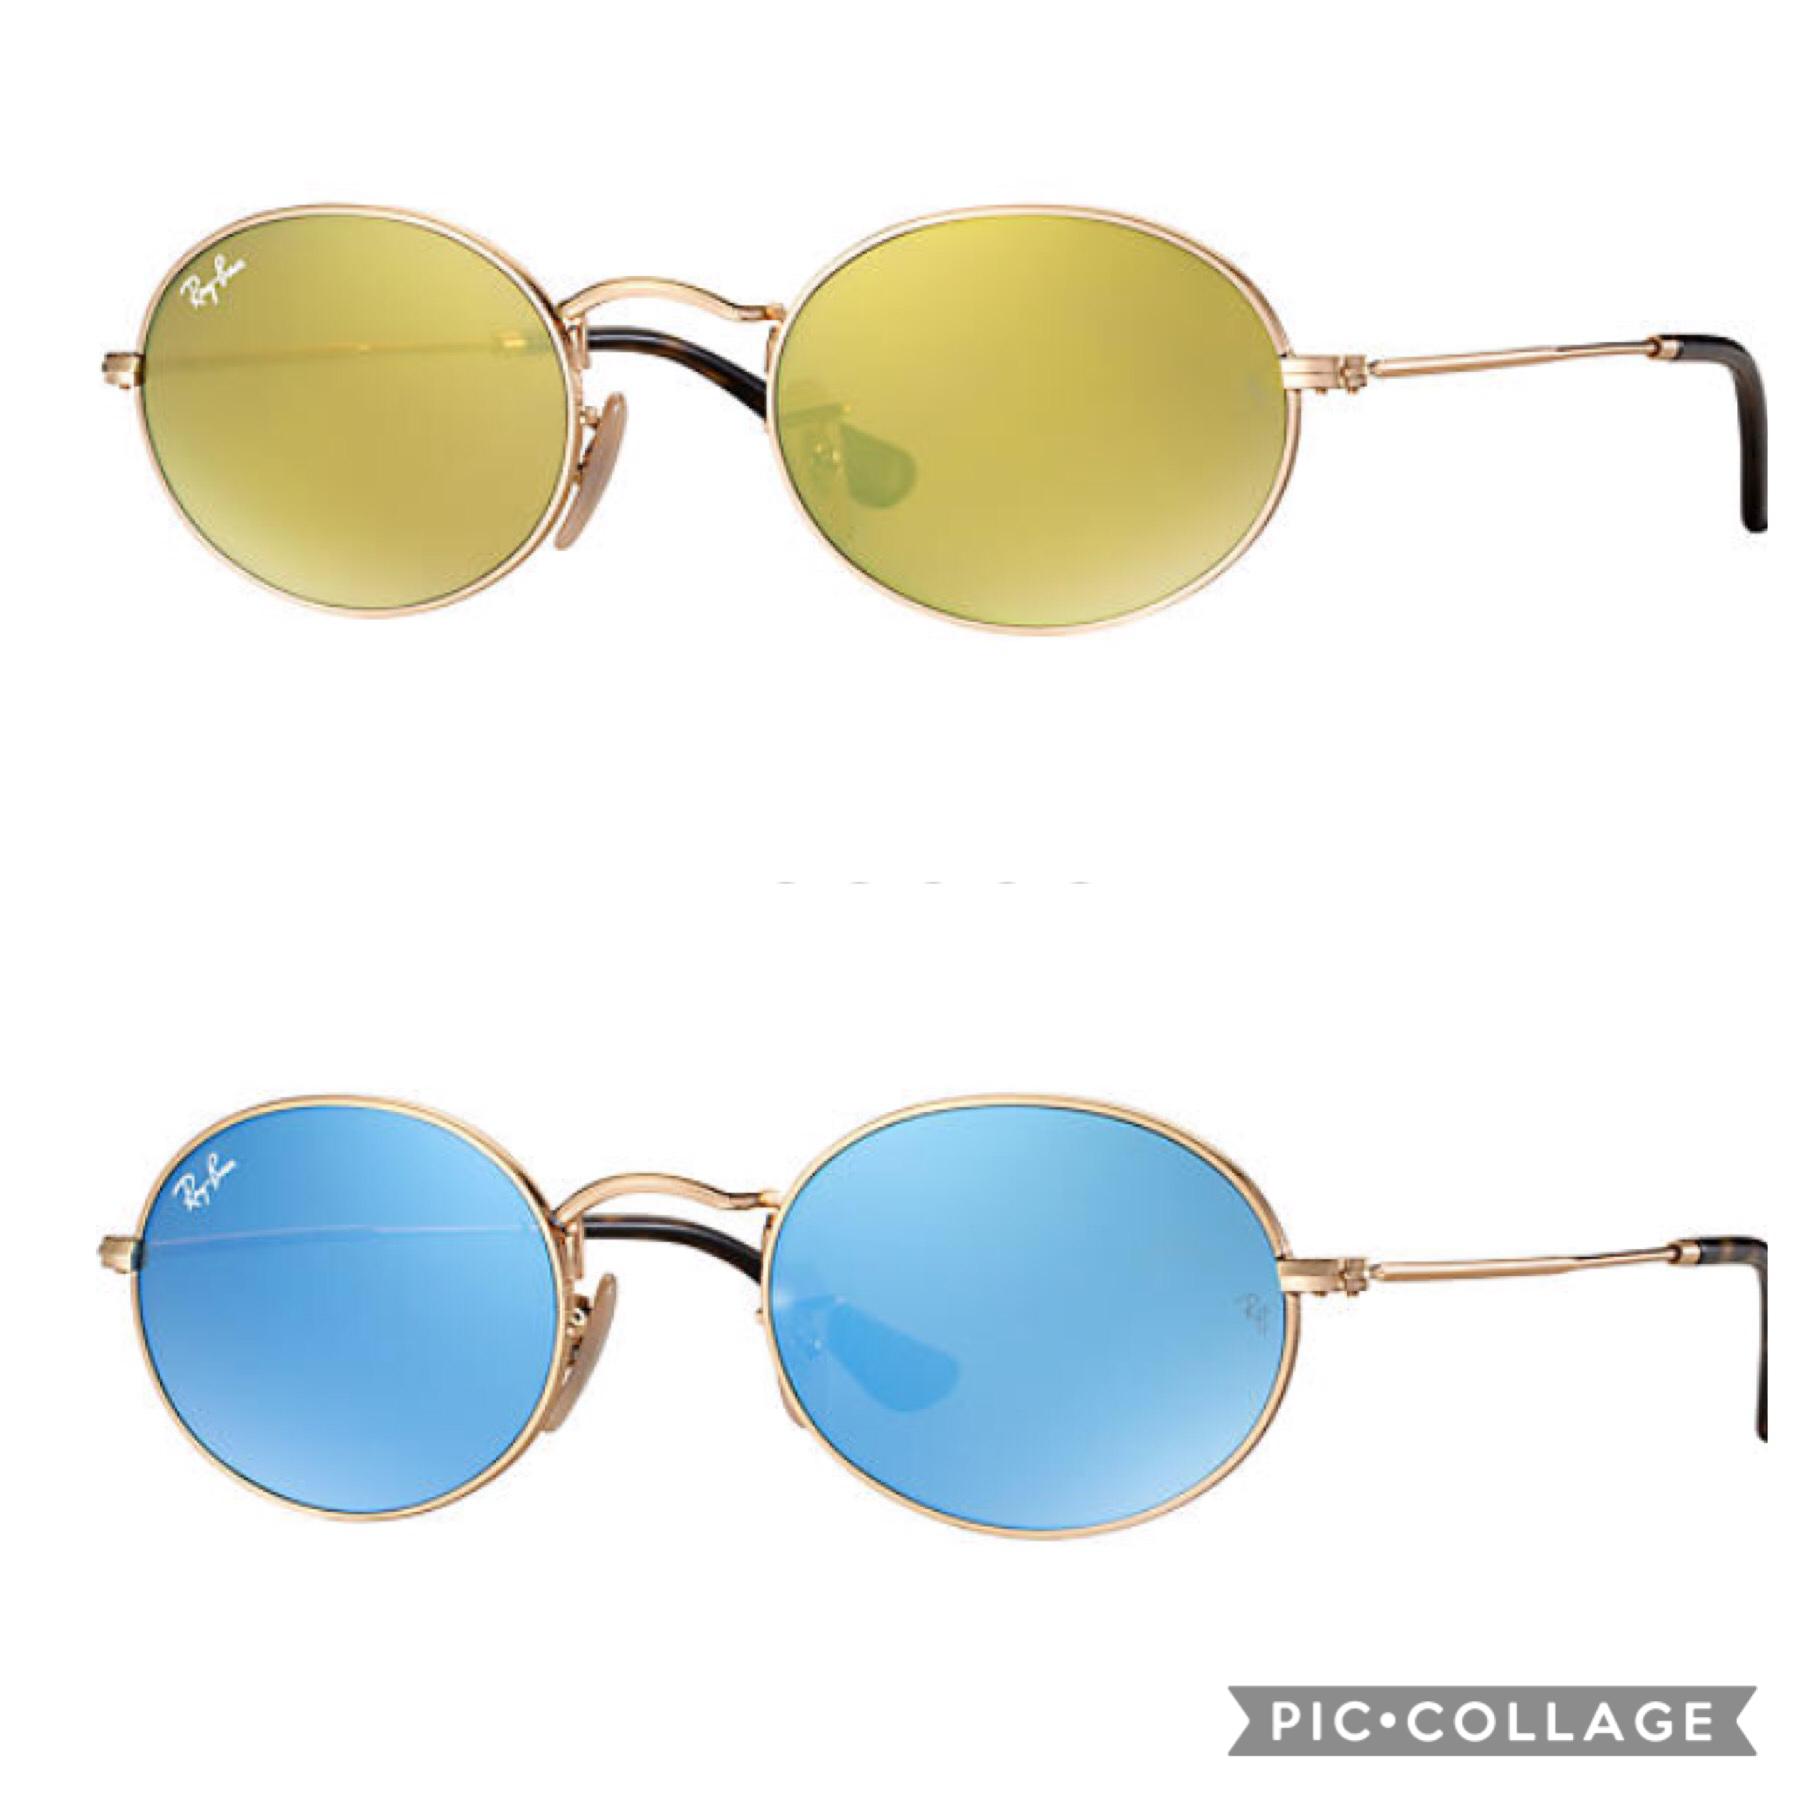 which ones should i get!! i like yellow more but i have blonde hair so idk if that would work..